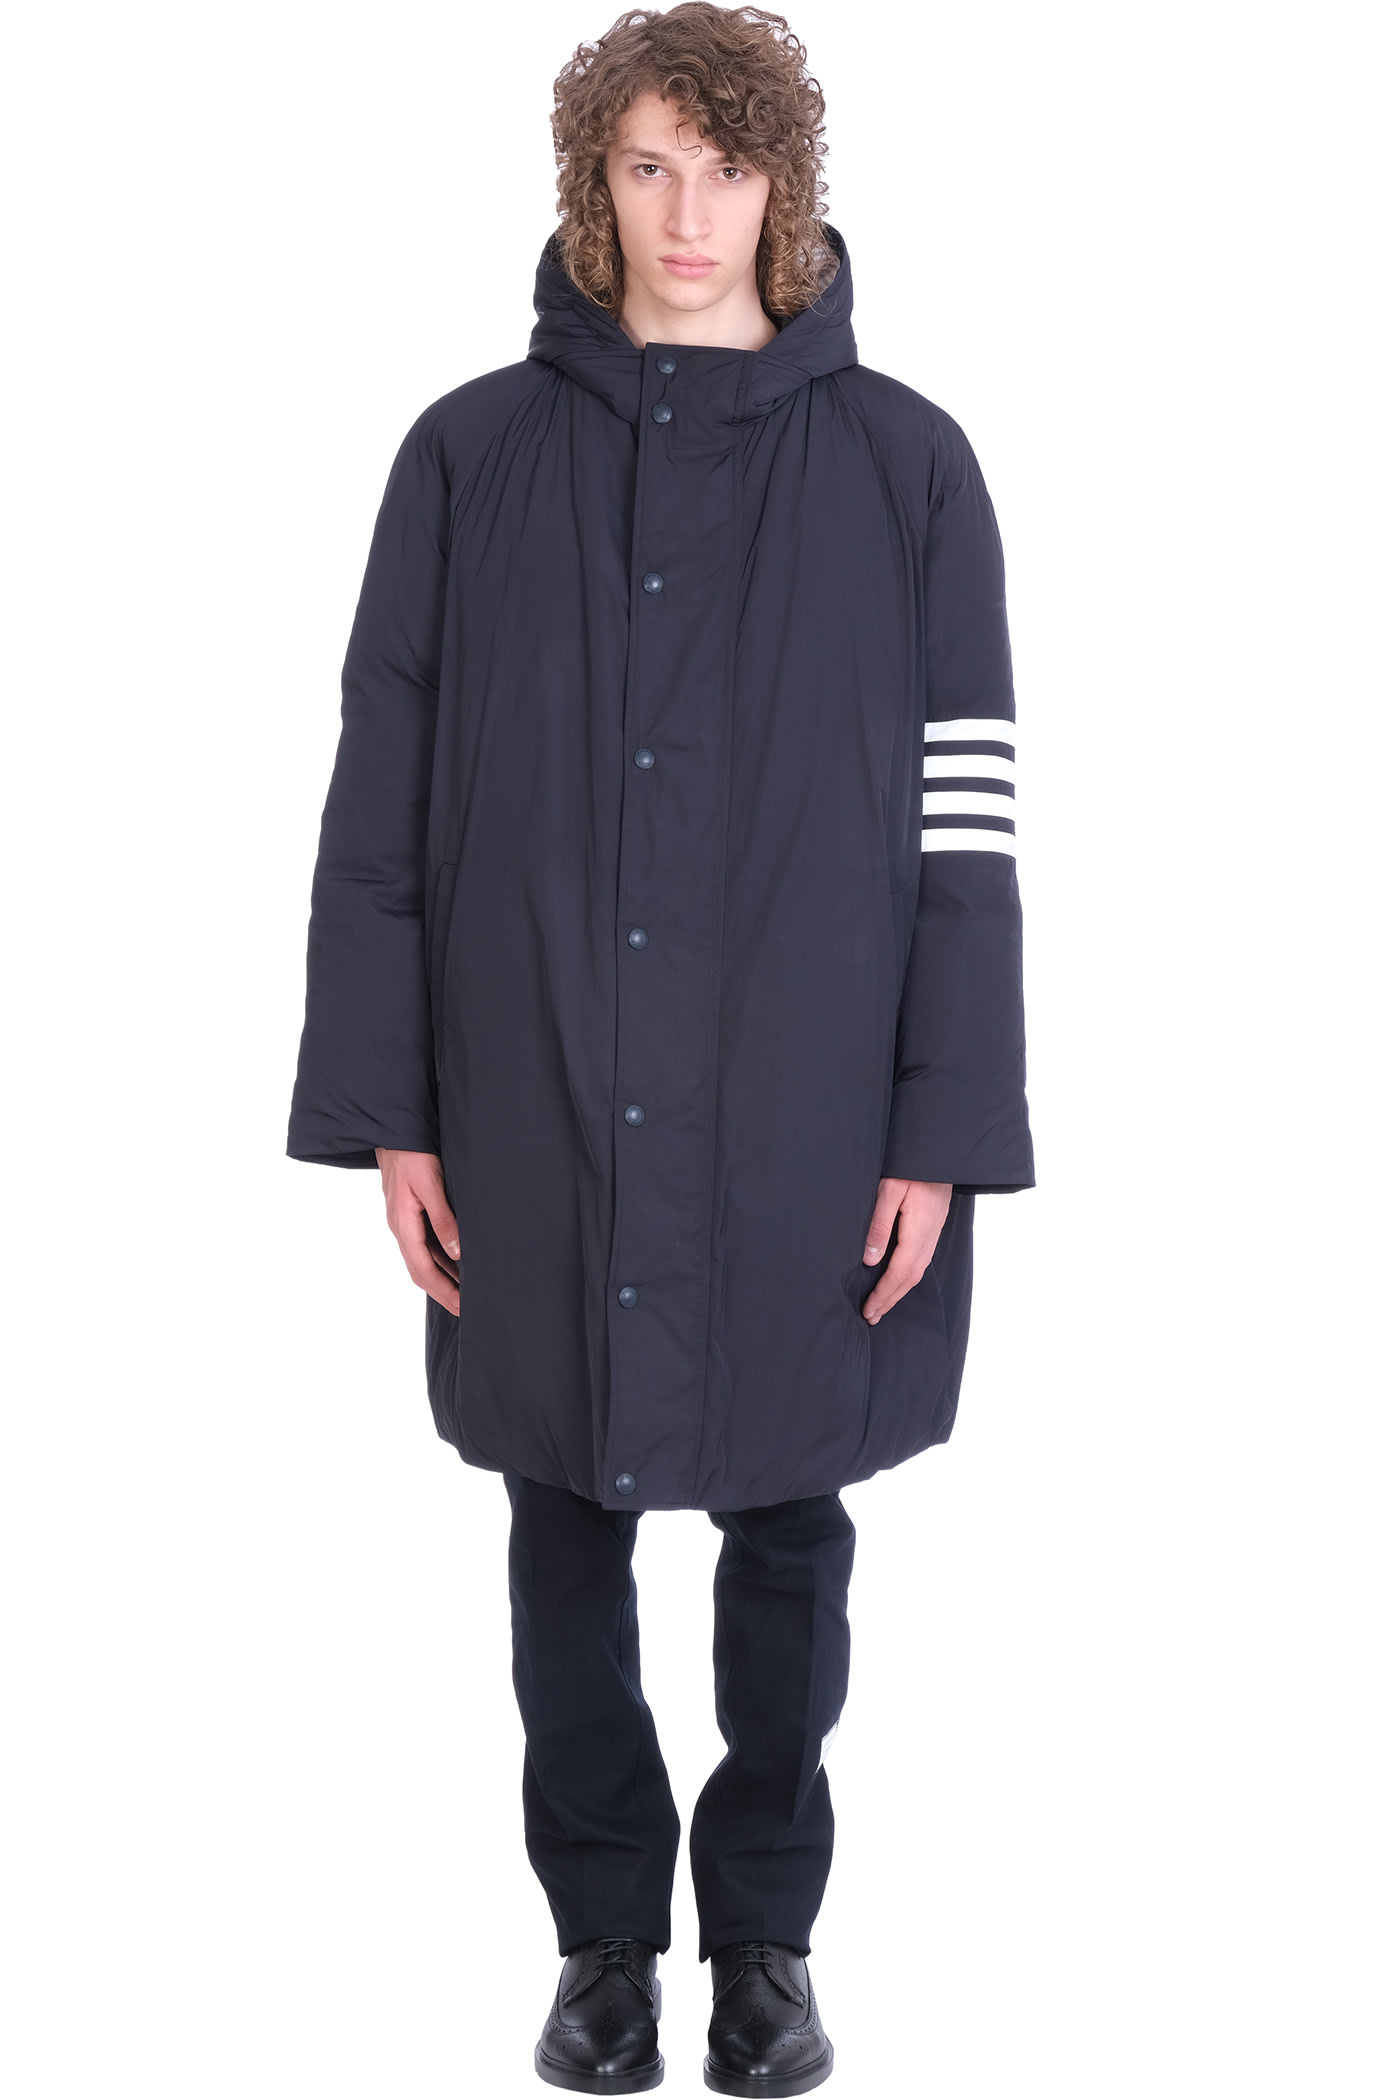 Thom Browne Puffer In Blue Polyester